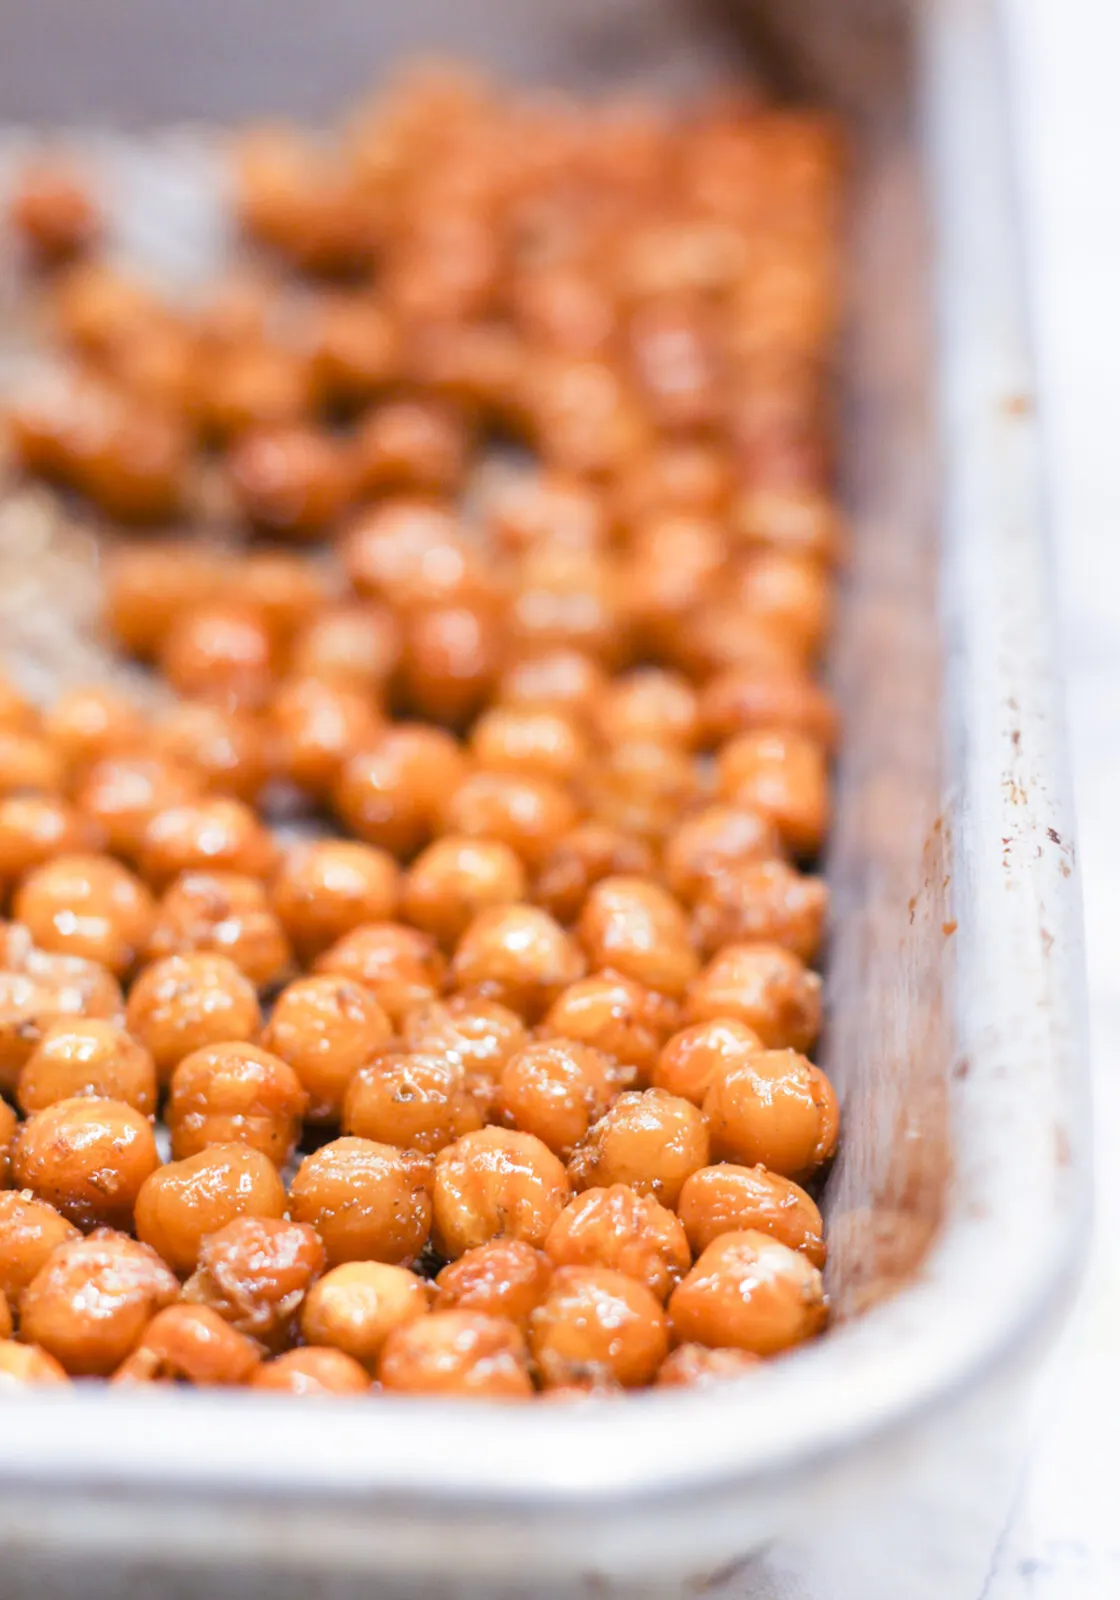 Toasted chickpeas on a baking sheet.